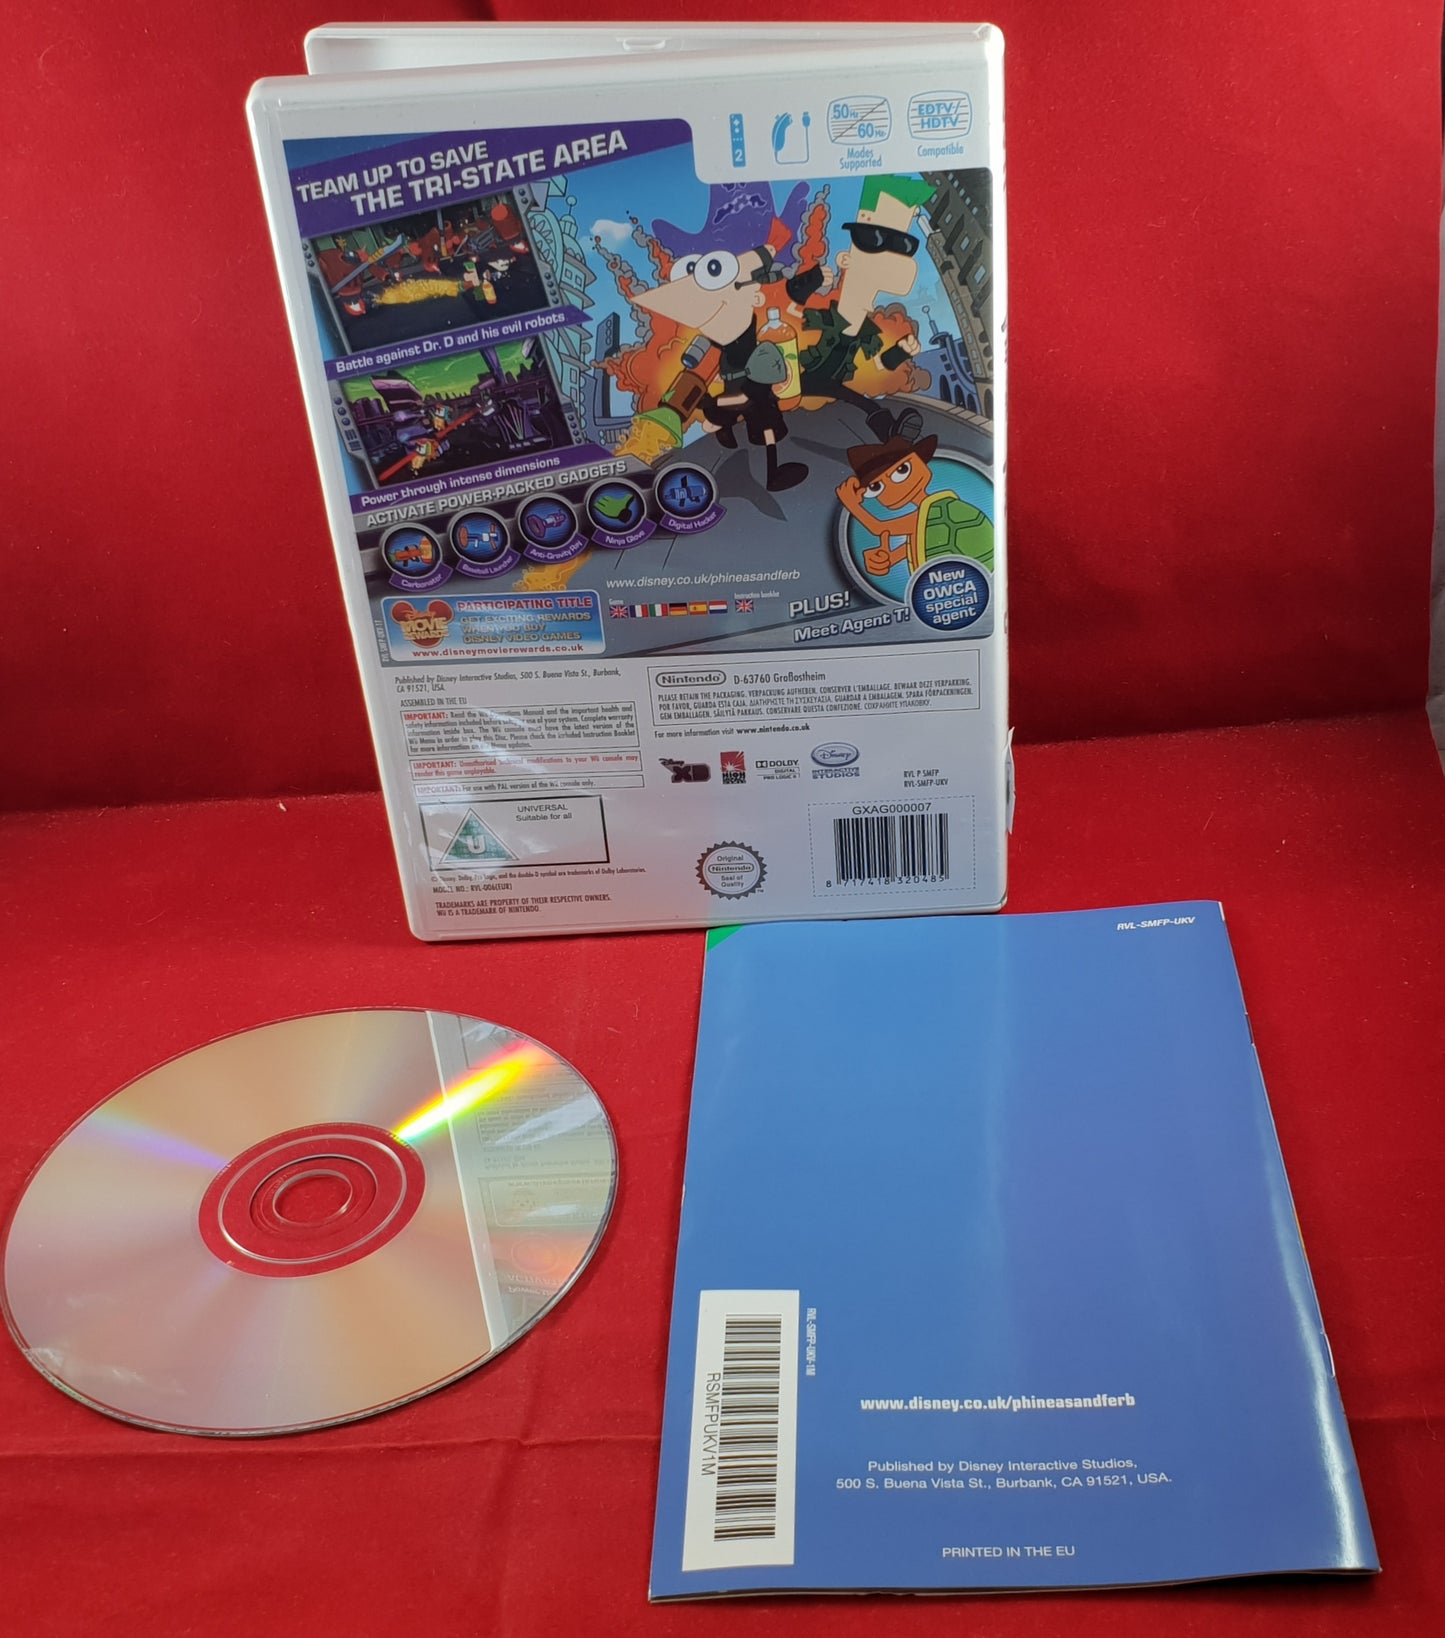 Phineas and Ferb Across the 2nd Dimension Nintendo Wii Game